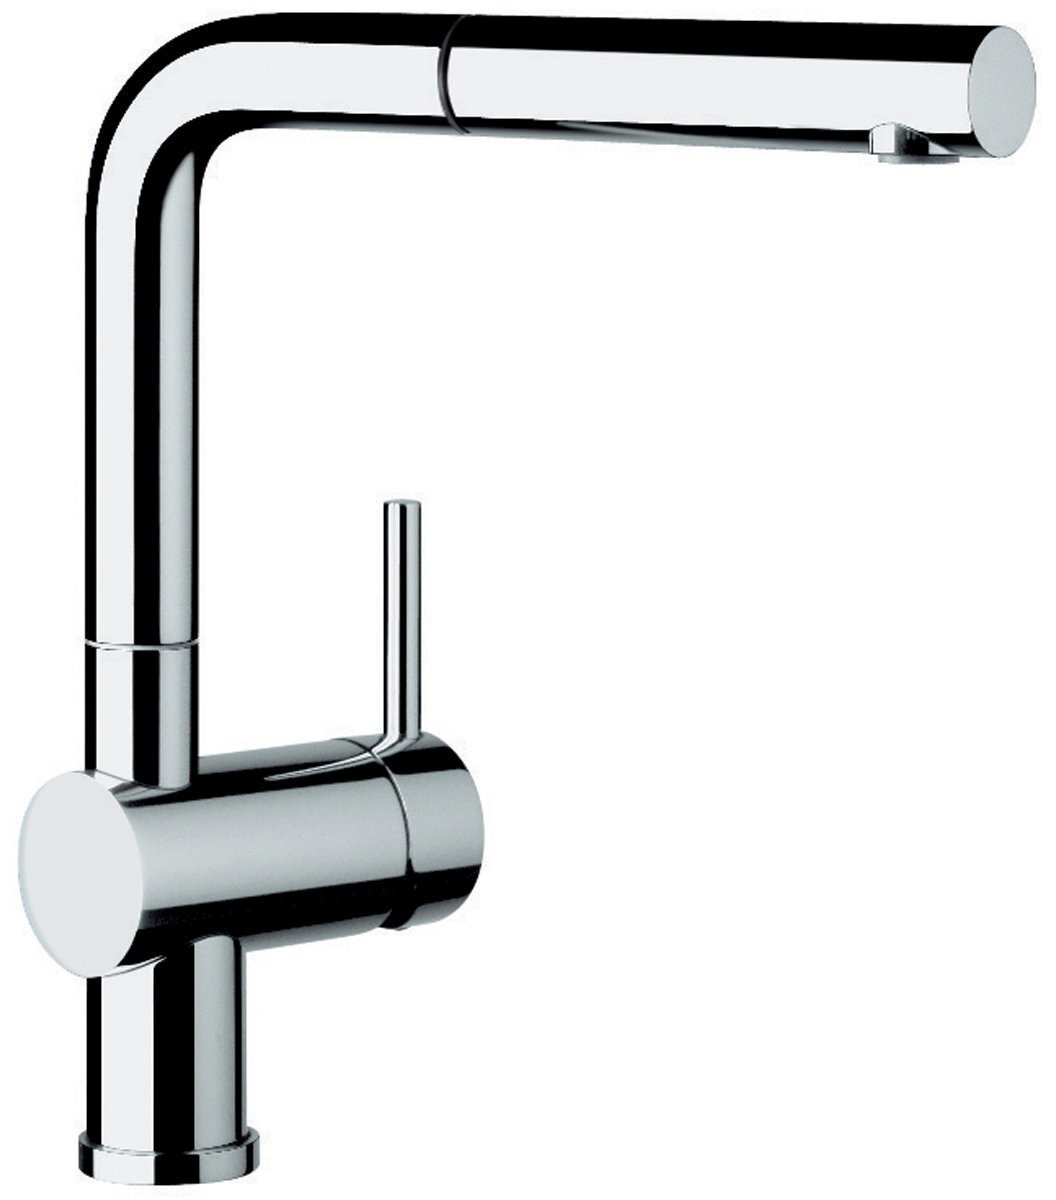 Hot water mixer taps from BLANCO